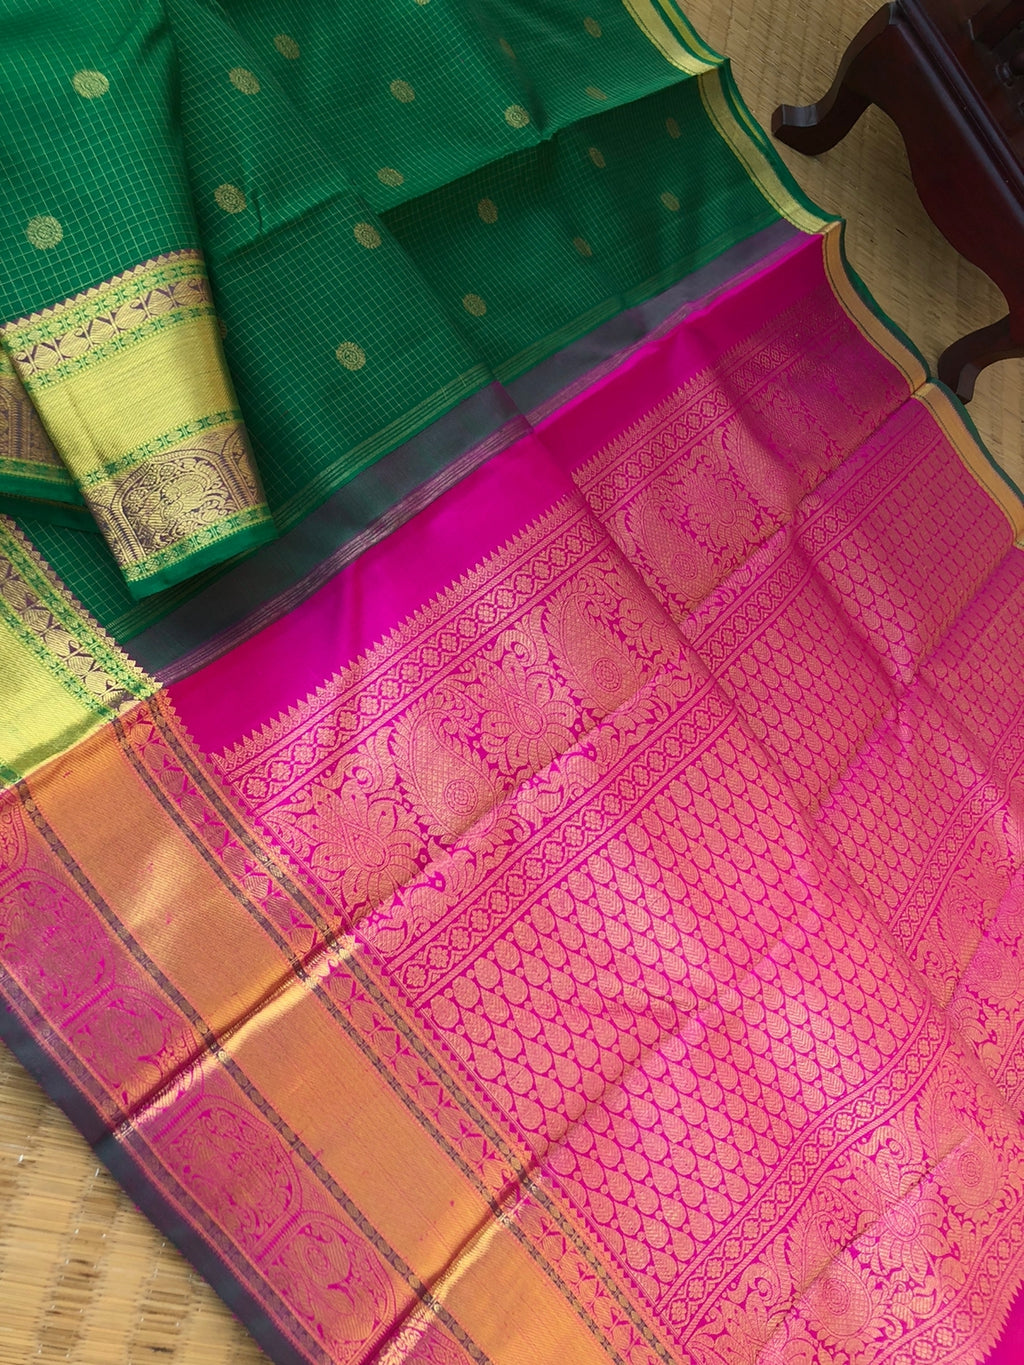 Kamakshi - Traditional kattams on Kanchivarams - most beautiful traditional green and rani pink with podi kattam ( tiny chex) with chackaram buttas over the body with densely woven pallu